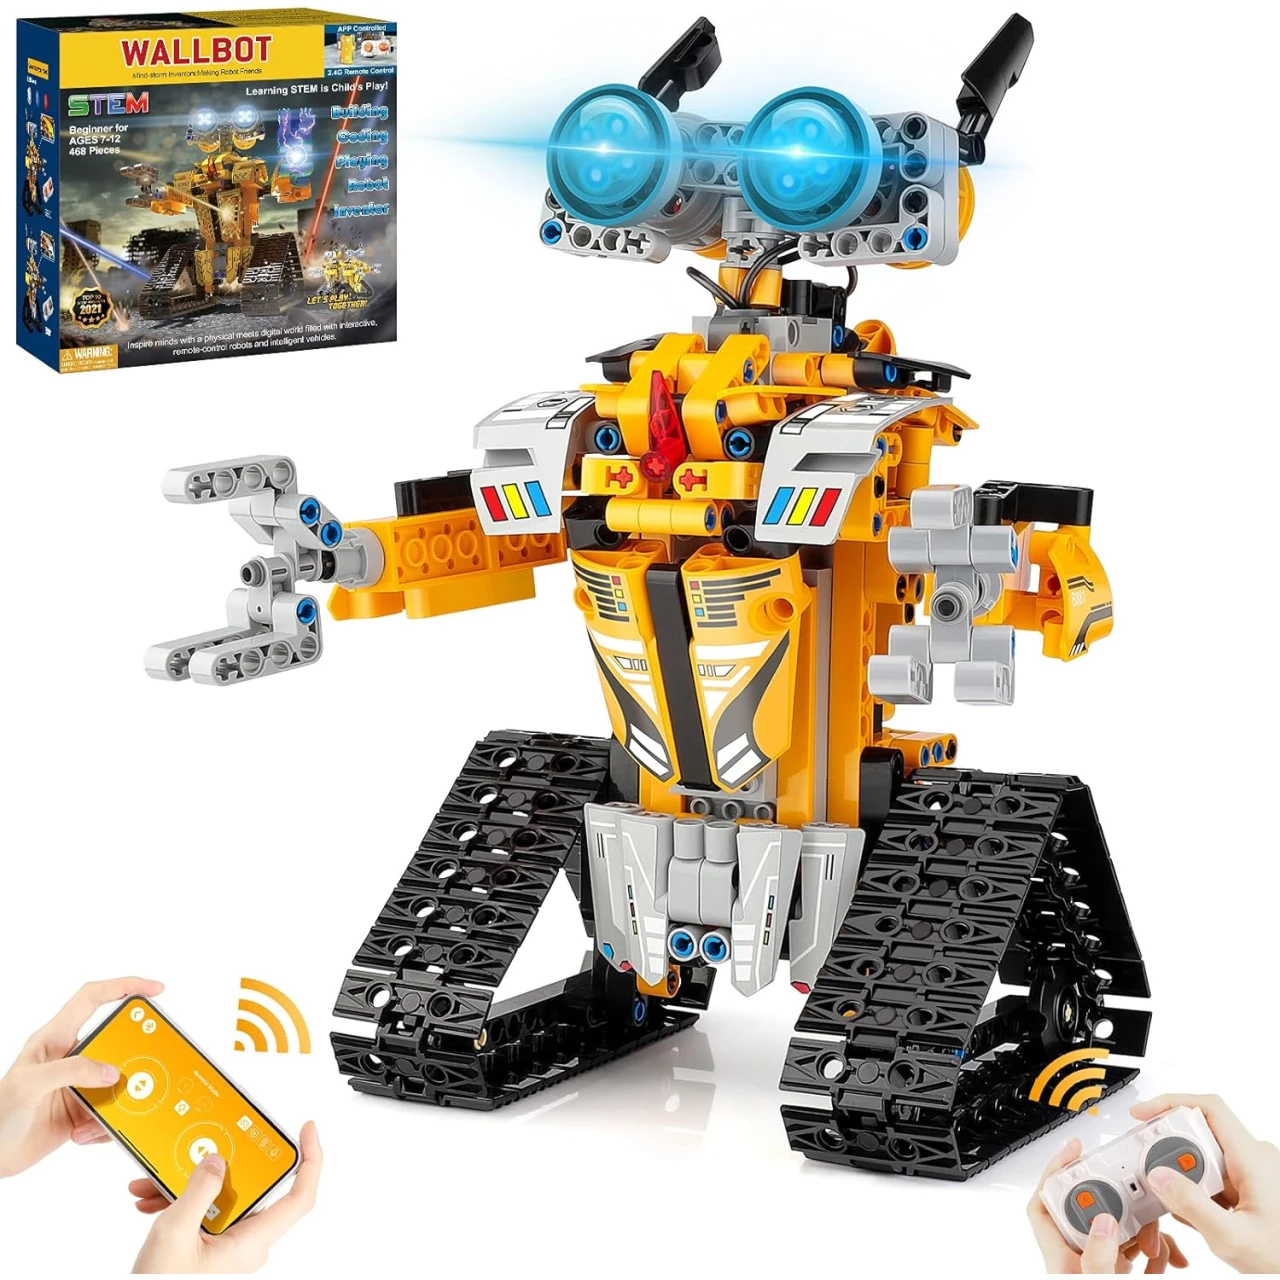 Sillbird STEM Projects for Kids Ages 8-12, Remote &amp; APP Controlled Robot Building kit Toys Gifts for Boys Girls Age 8 9 10 11 12-15 (468 Pcs)